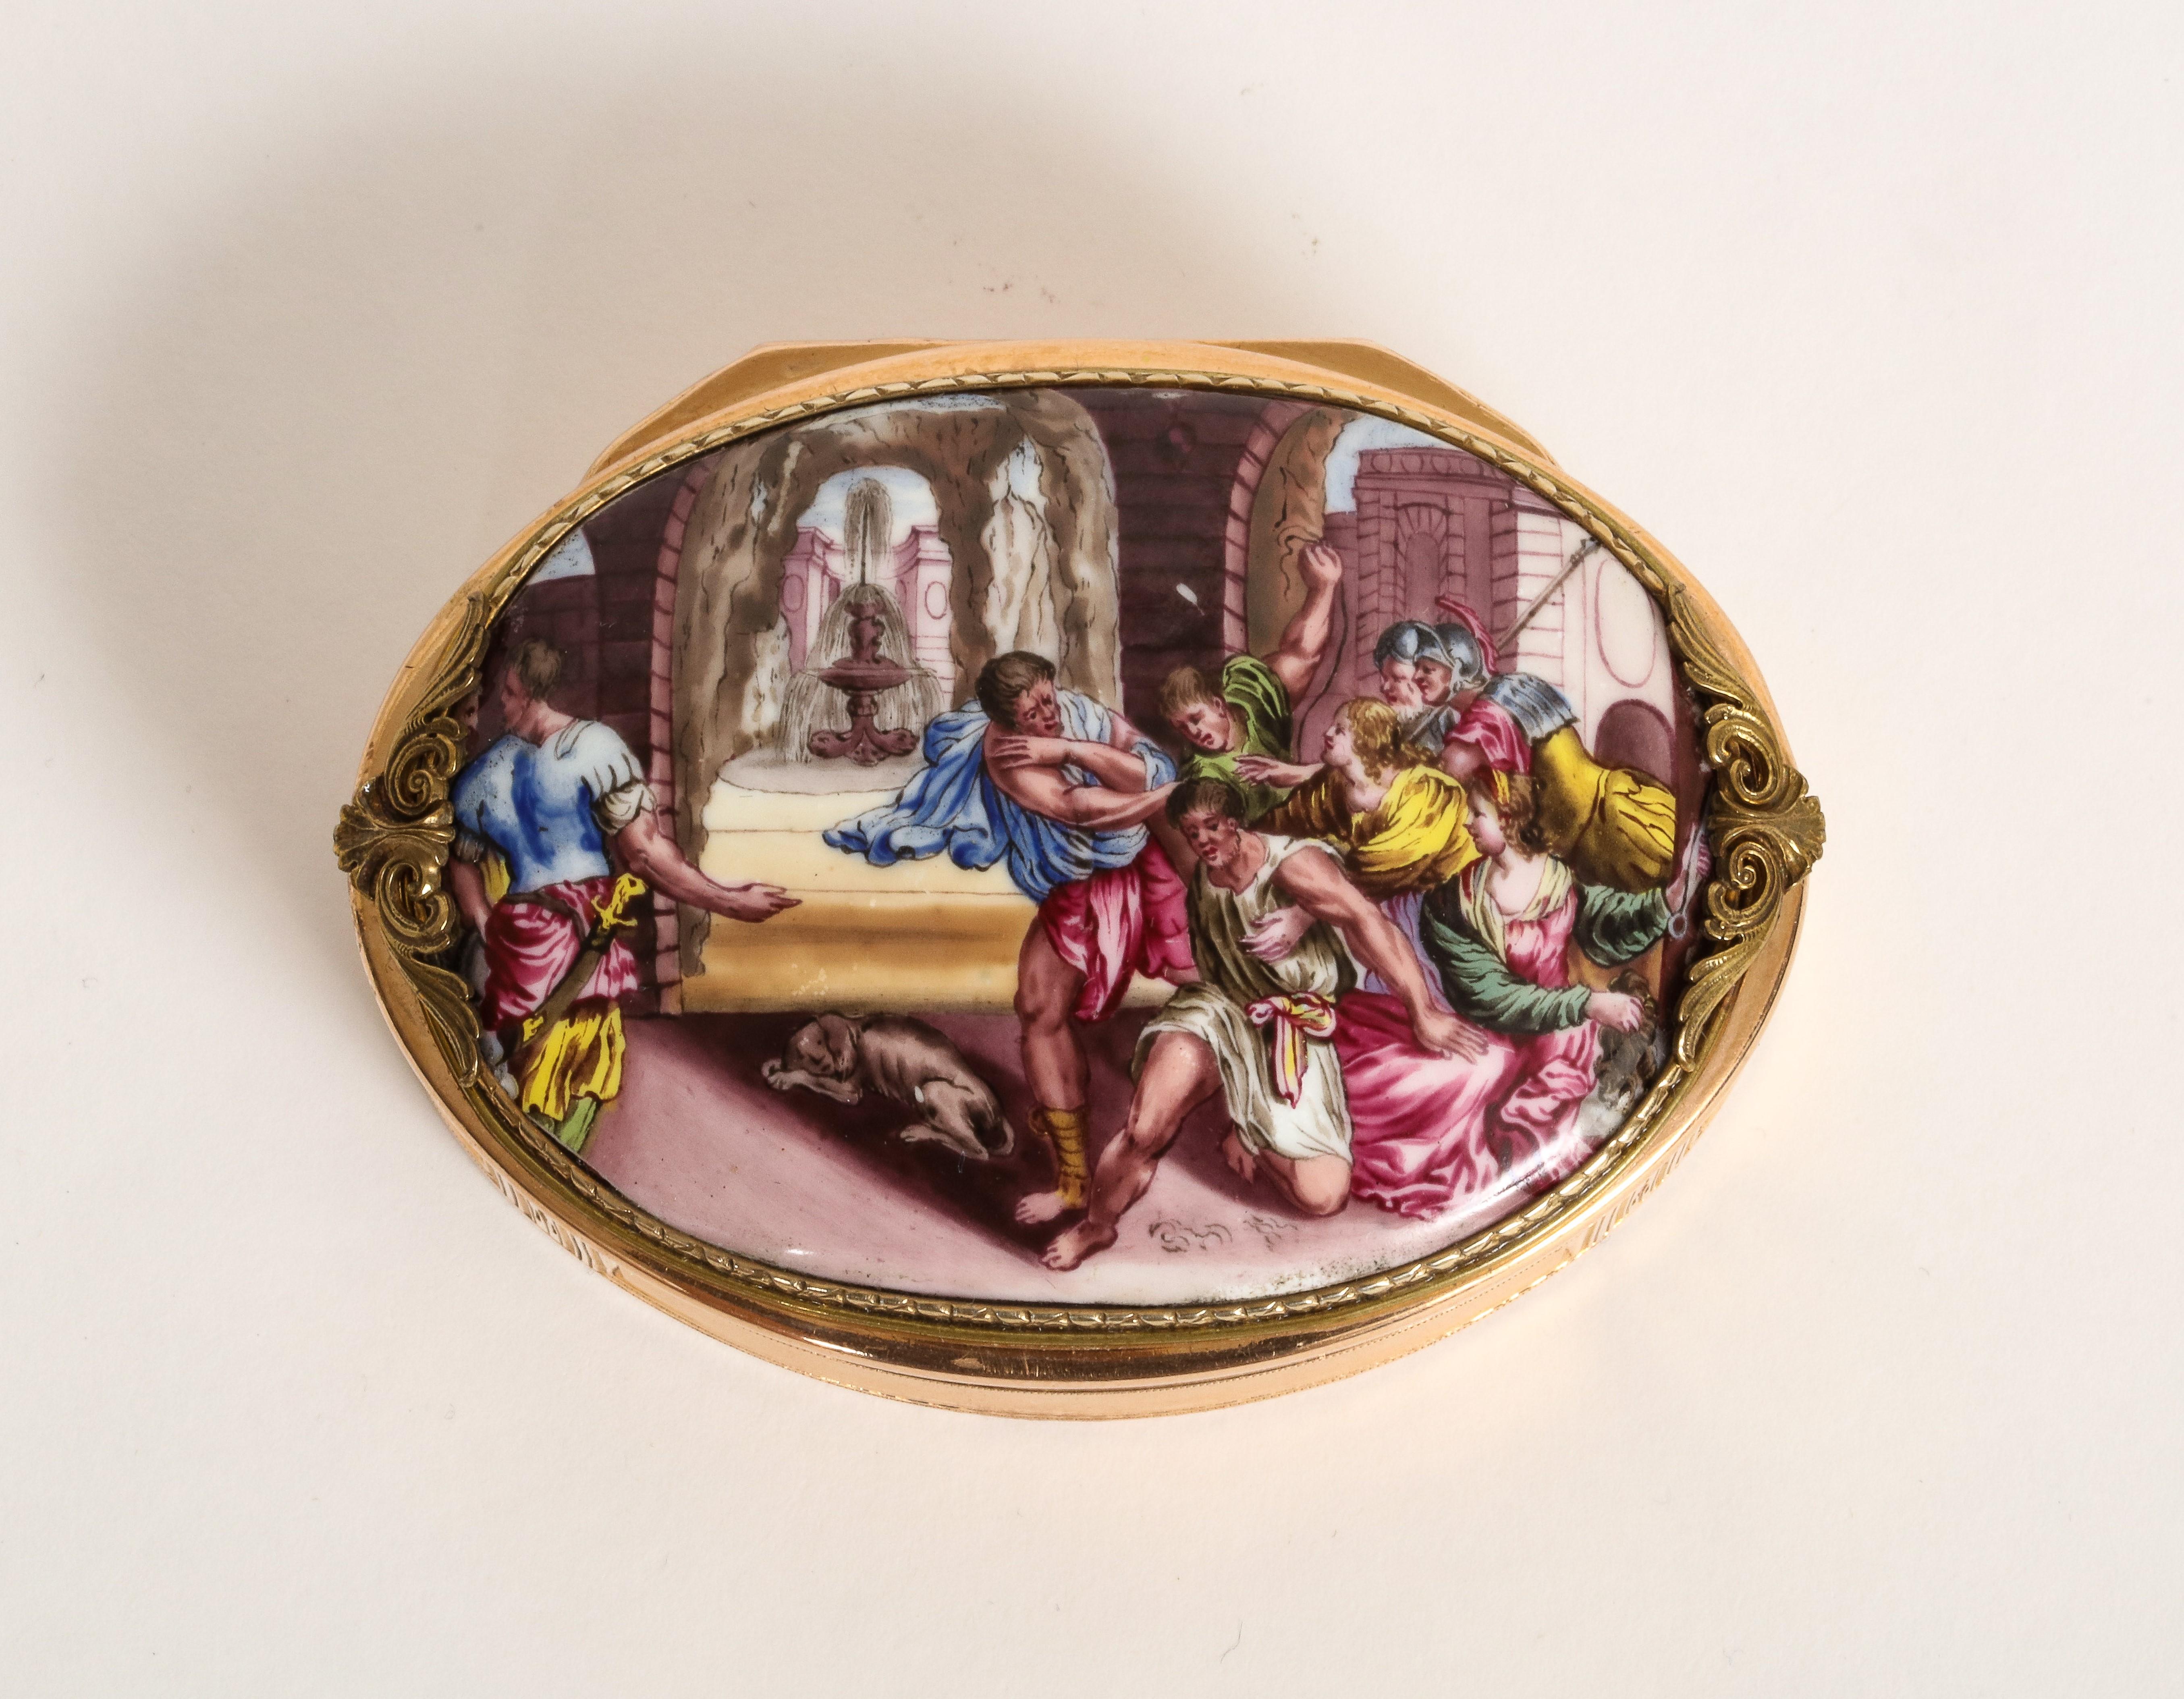 German gold & porcelain snuff box
Maker's Mark F(-) Crowned, Hanau Circa 1780, - Struck with the Hanau Town Mark for 18k Gold and a mark
resembling the Parisian Charge Mark of Julien Alaterre, The Porcelain Plaque, Continental, Circa 1800

Oval